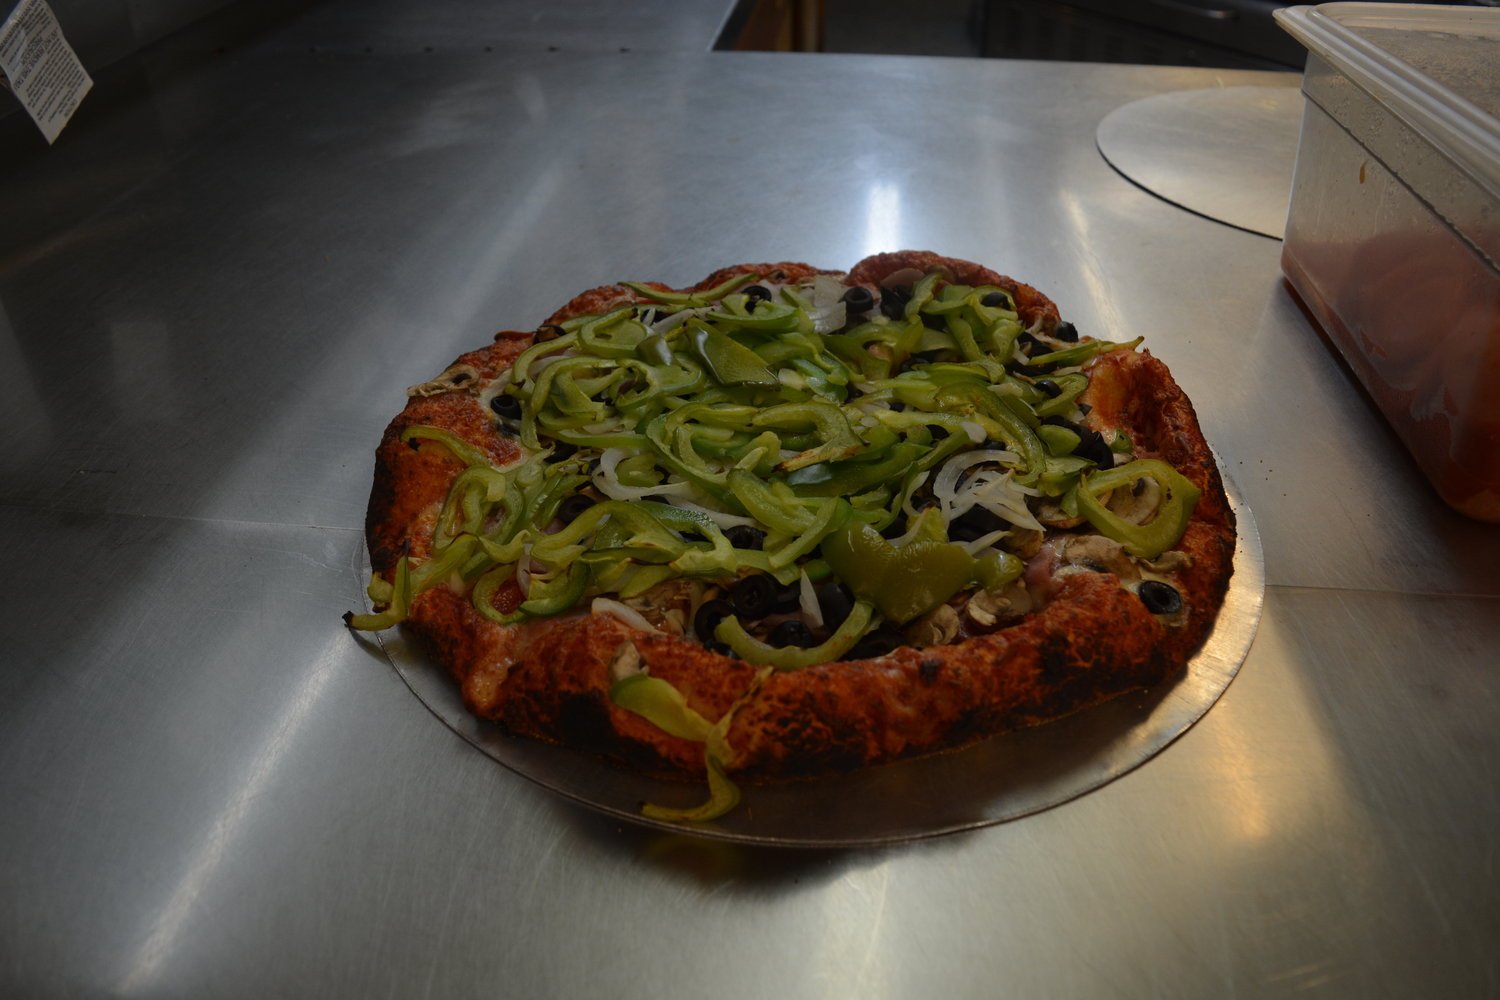 A pizza is decked out in peppers, olives, and mushrooms at Rocky’s Pizza & R Bar in Battle Ground on July 28.